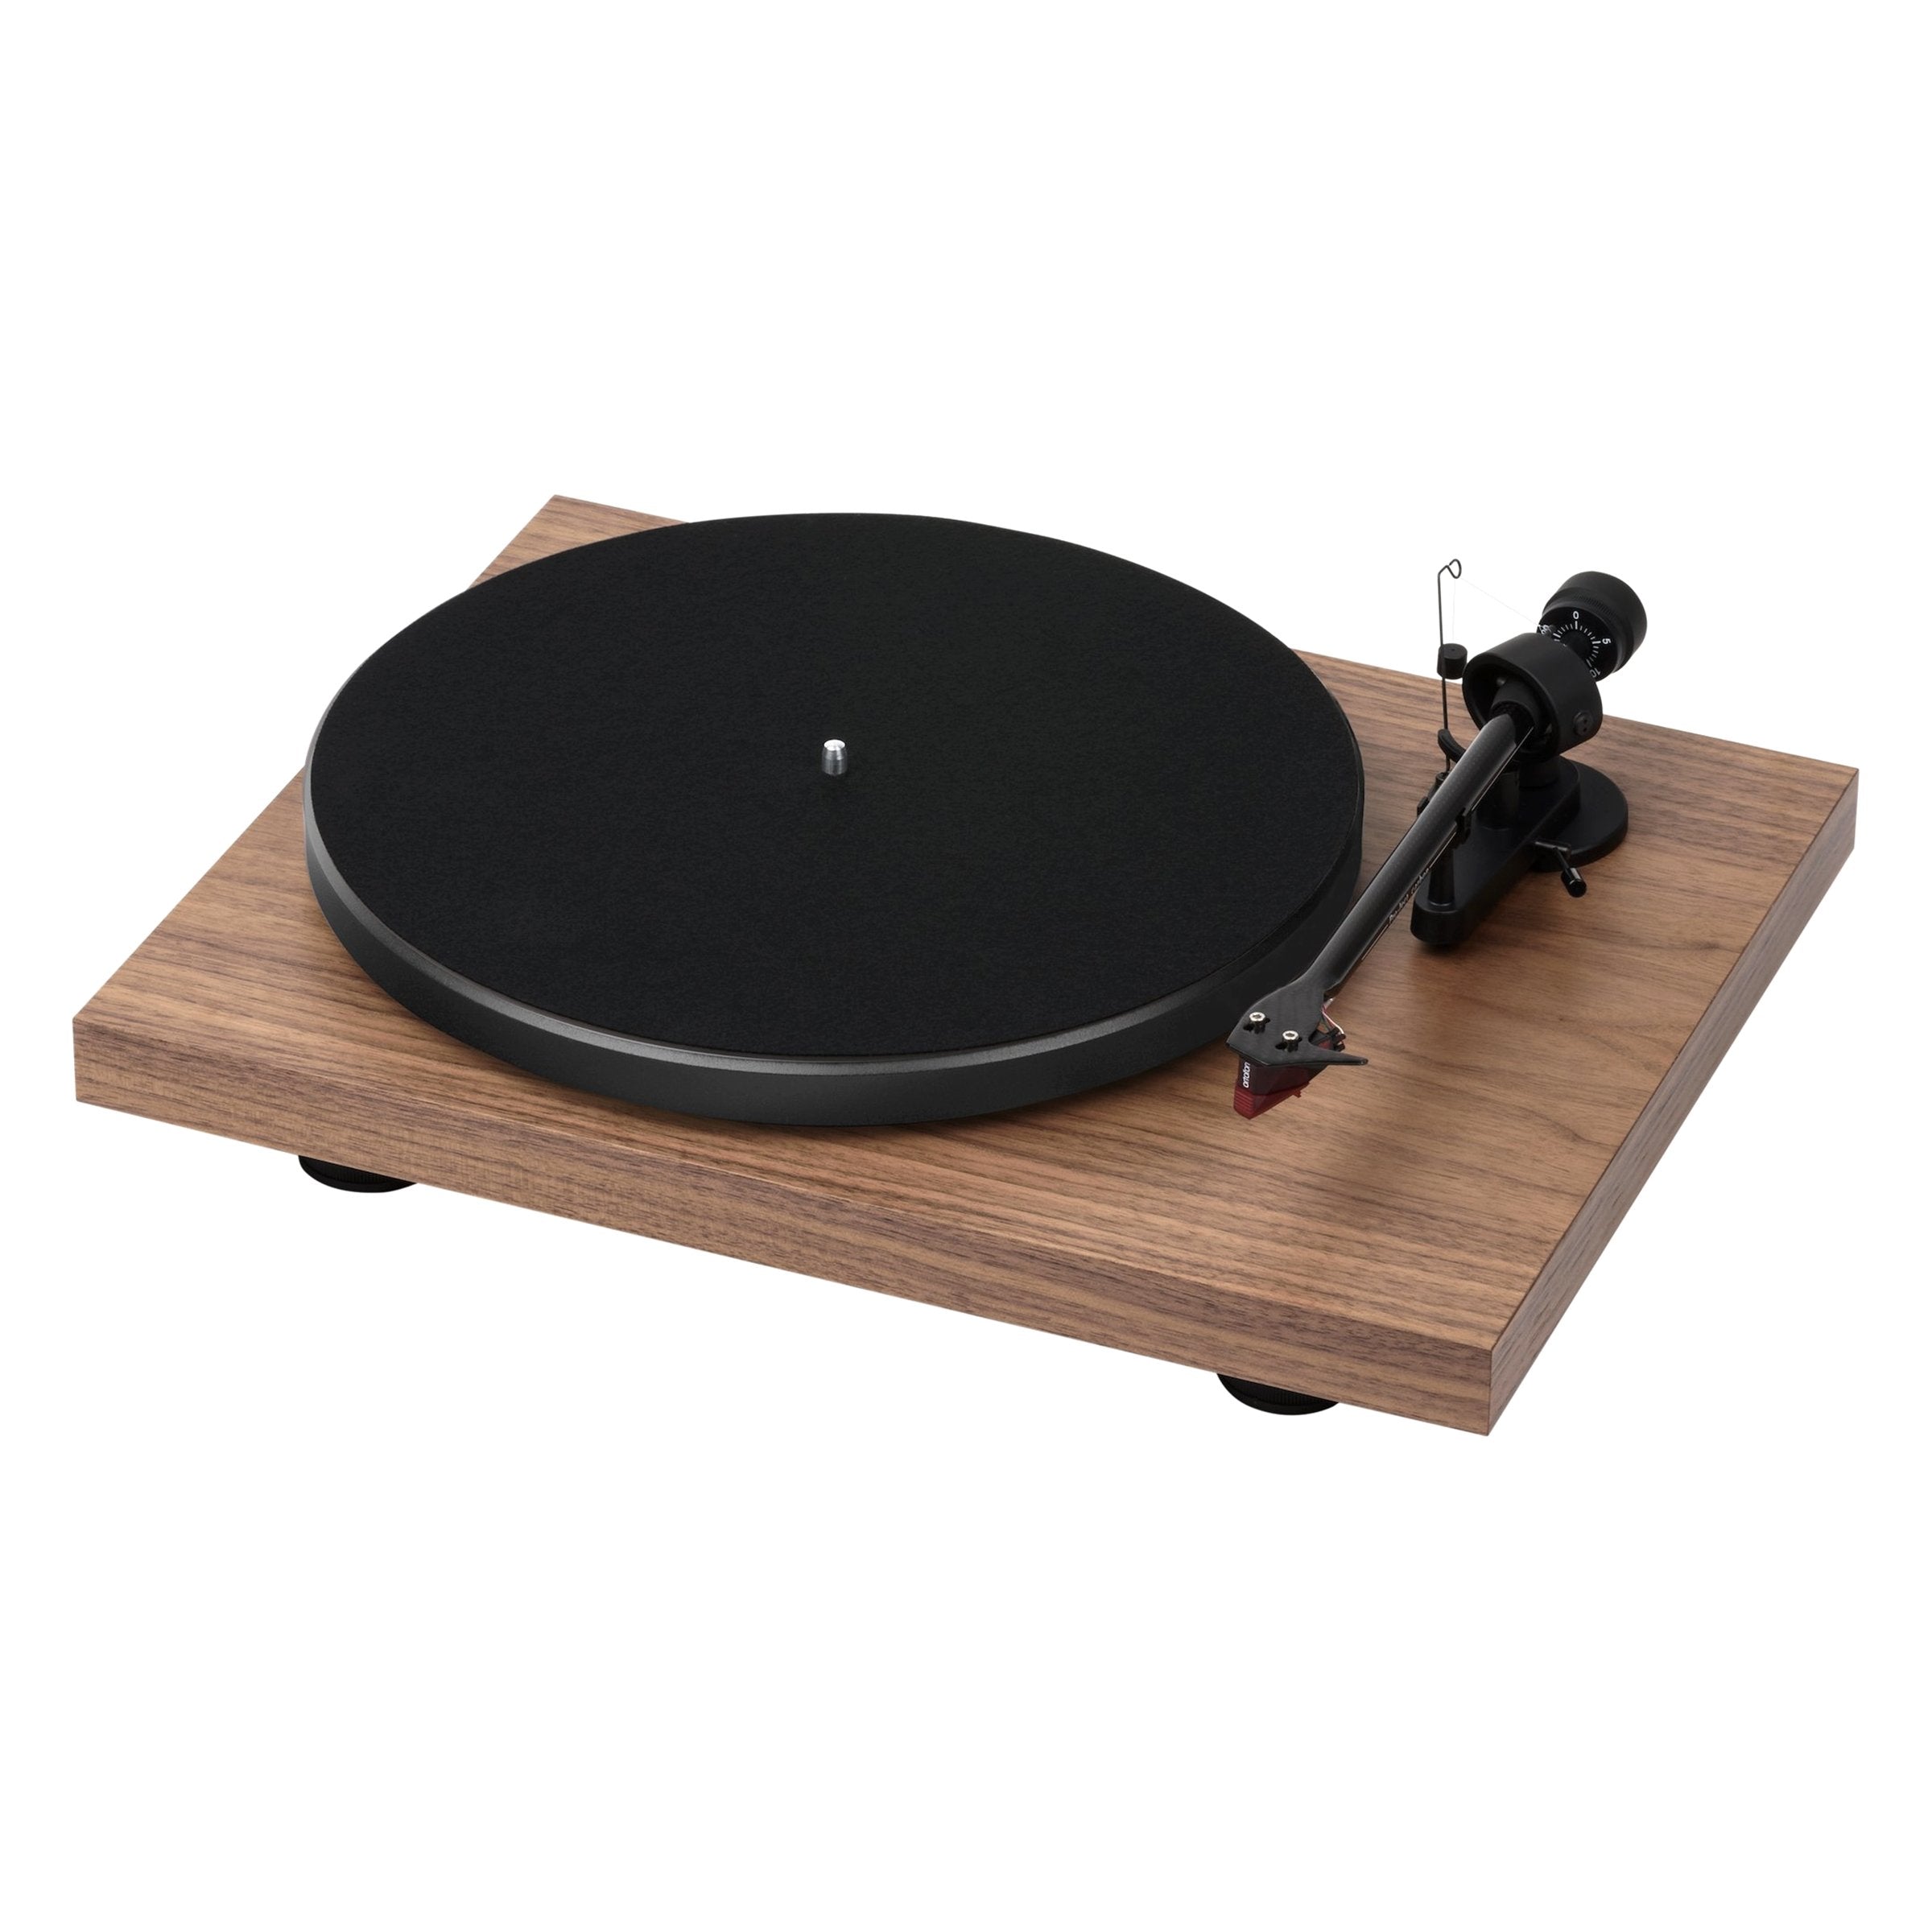 Pro-Ject: Debut Carbon DC Turntable - Walnut